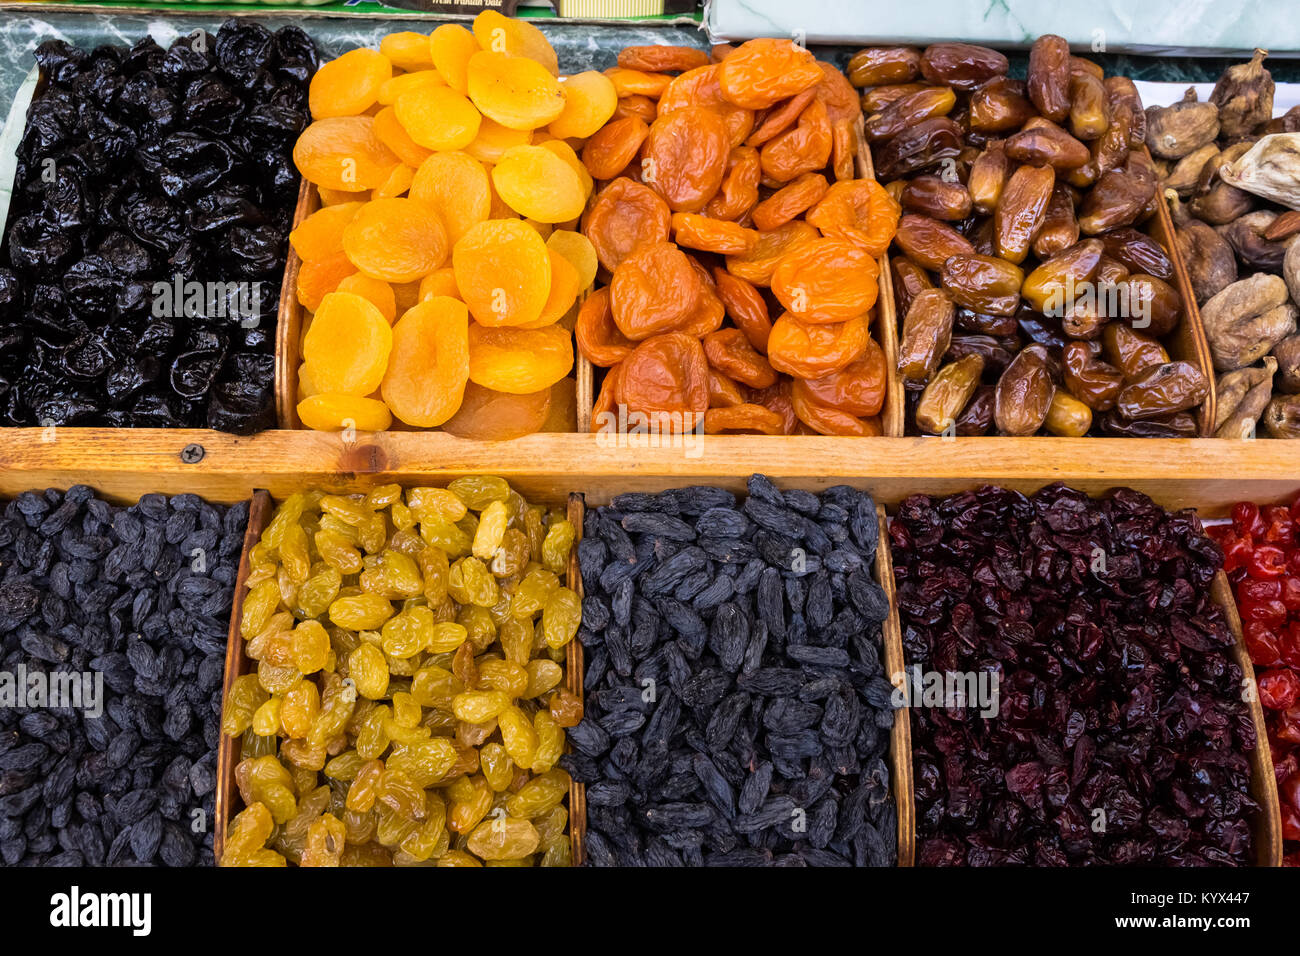 dry fruit mix on a pile on a food market, coloful dry fruits, dried fruits, different types of dry fruits, Assortment of dried fruits closeup backgrou Stock Photo